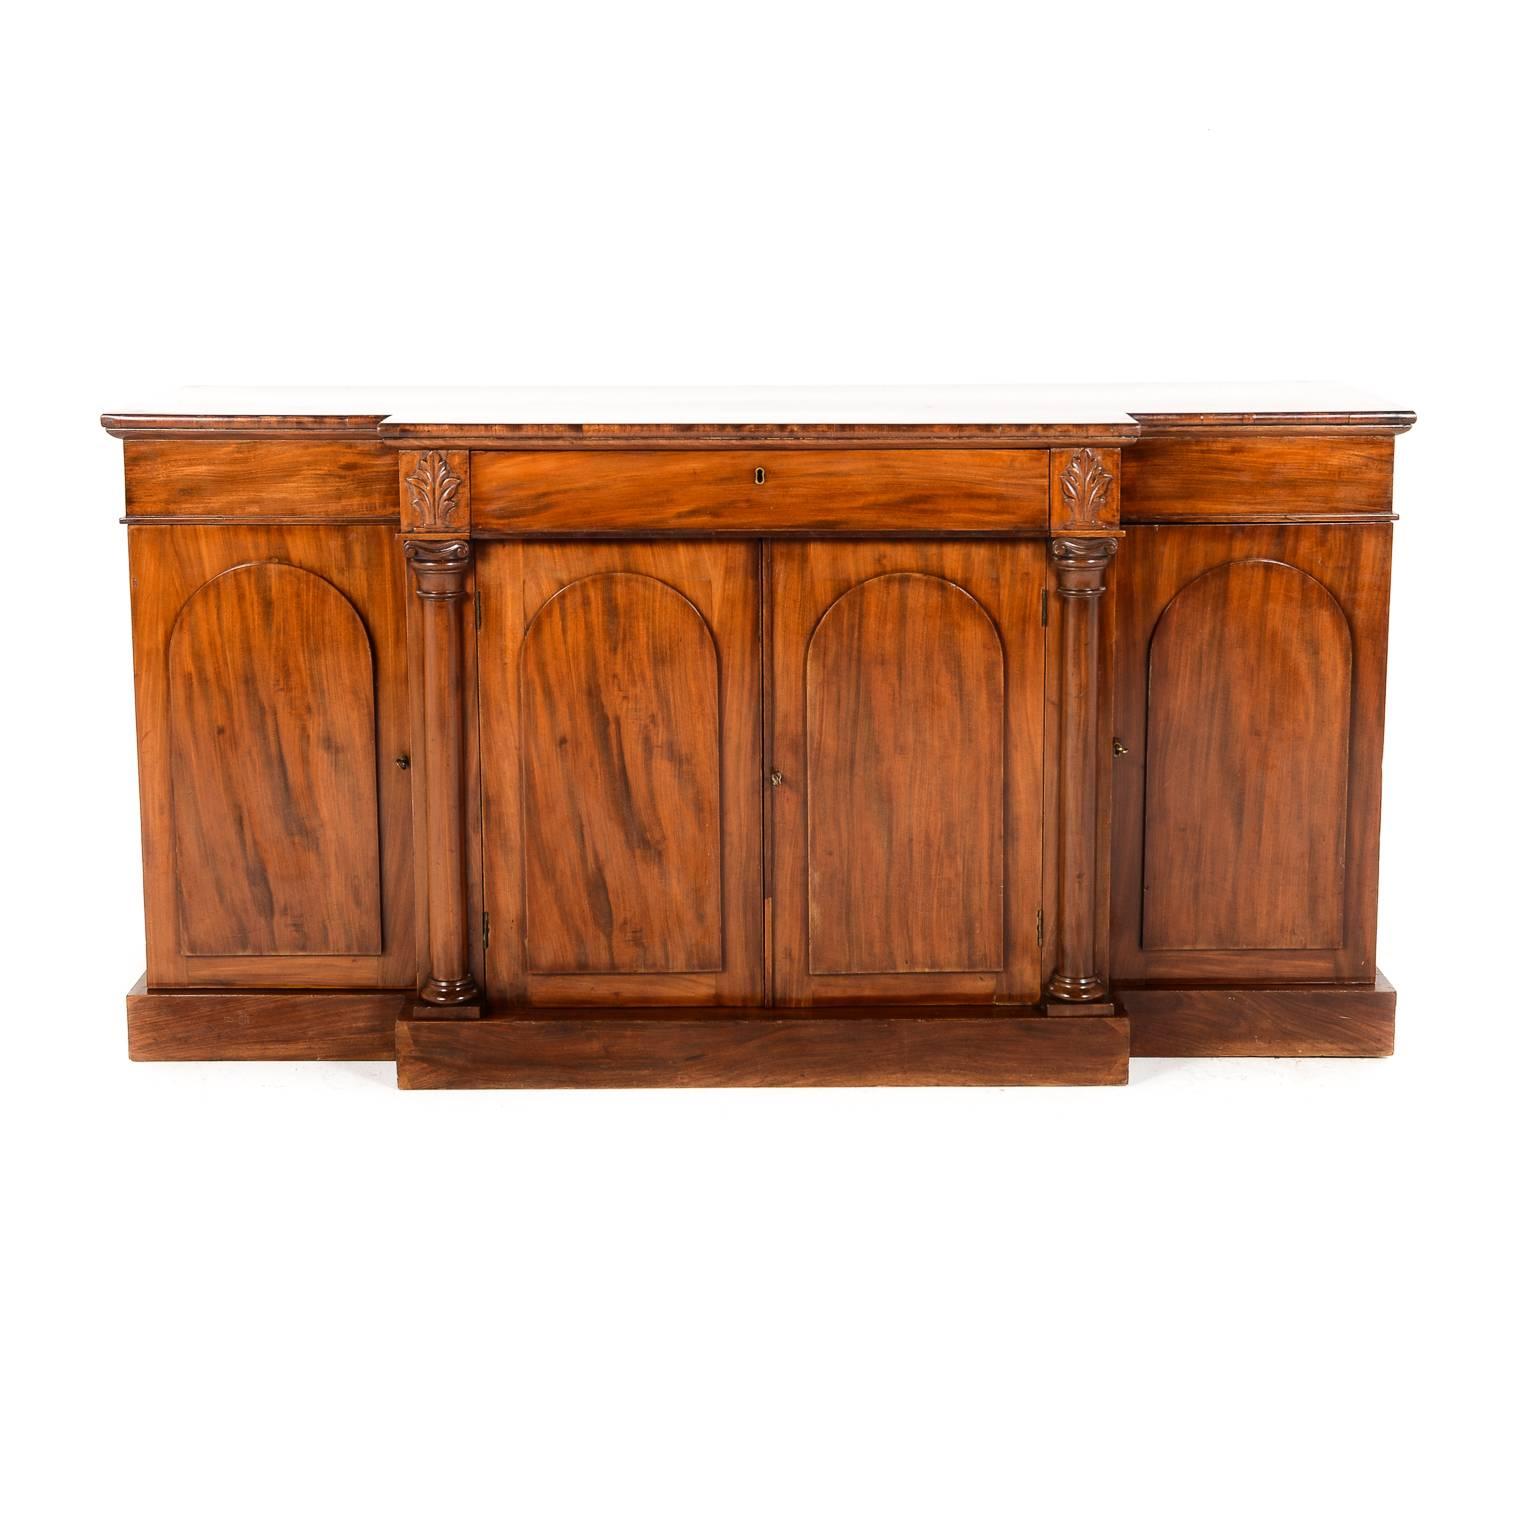 Antique English mahogany breakfront sideboard, circa 1870. Classic Victorian lines on this lovely piece. Shallow enough to make it very versatile throughout the home.





